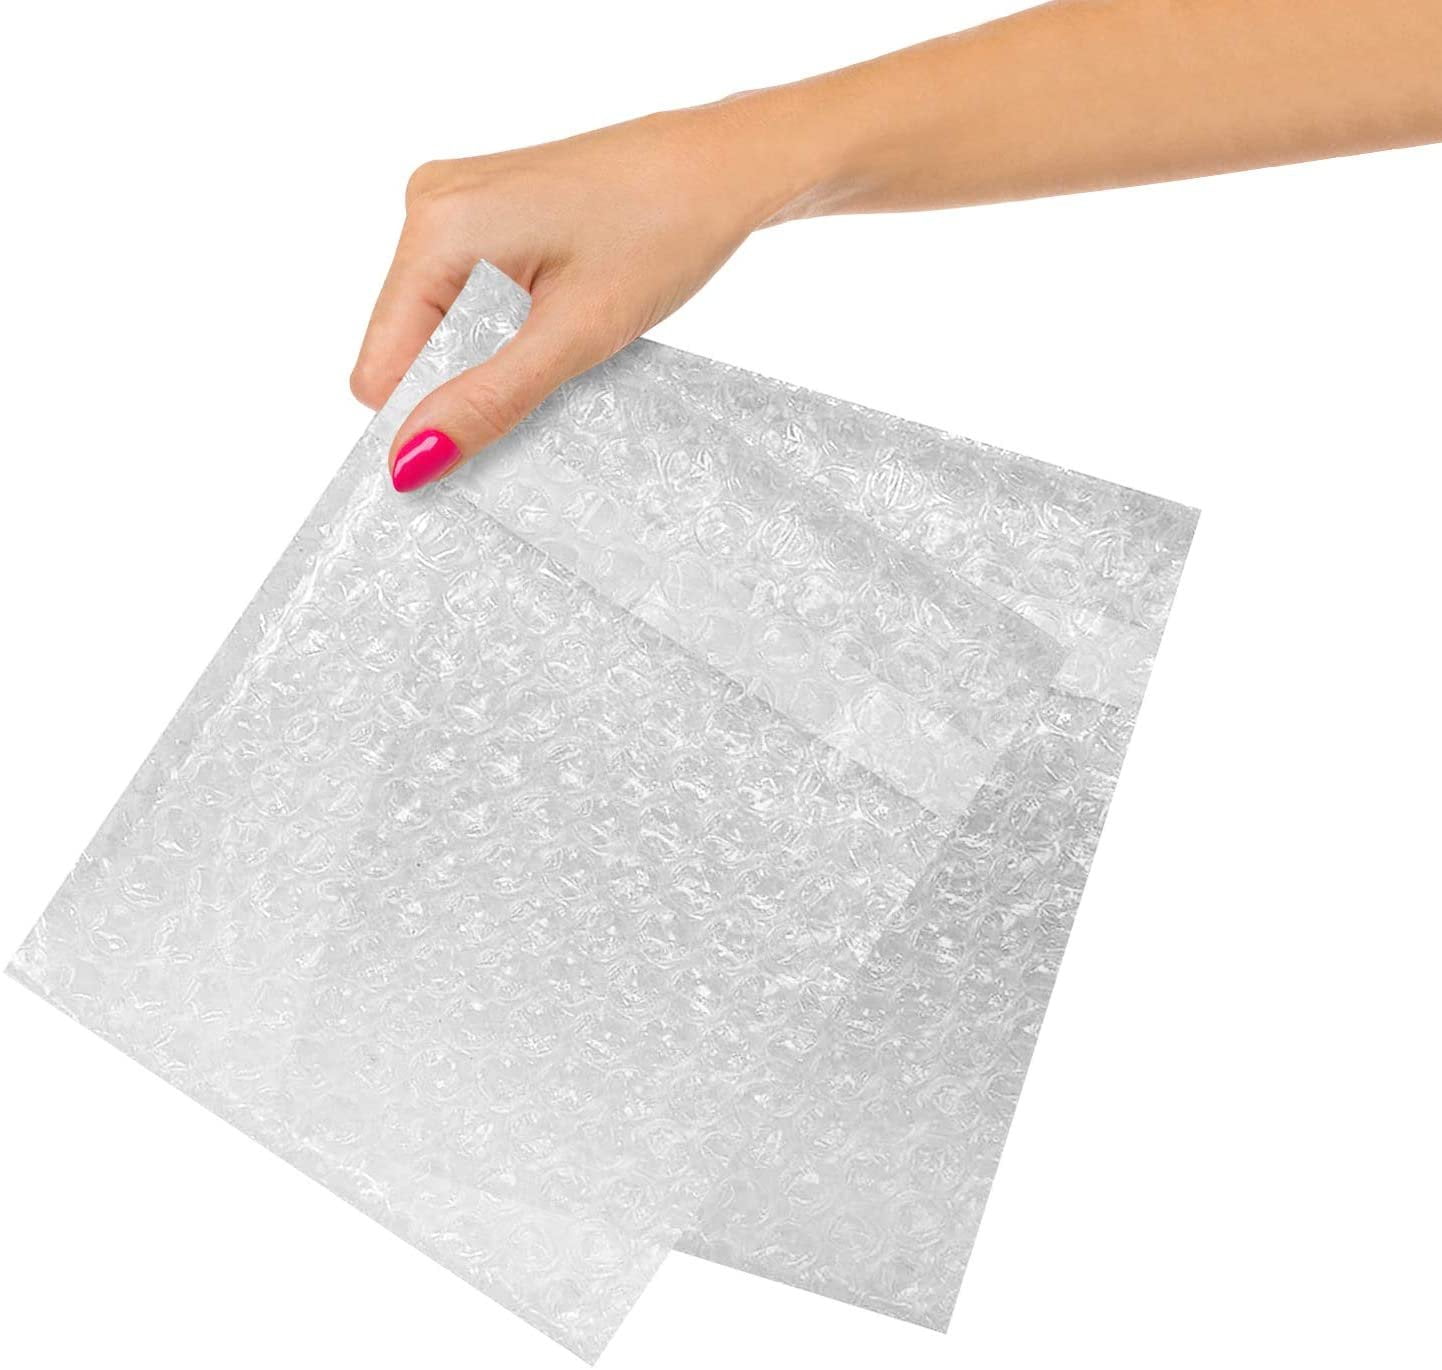 Bubble Out Bags 9” x12” Packing and Moving 50 Pack Clear Bubble Pouches Bags Double Walled Cushioning Bags Self-Sealing Protective Wrap Cushioning Pouches for Shipping 